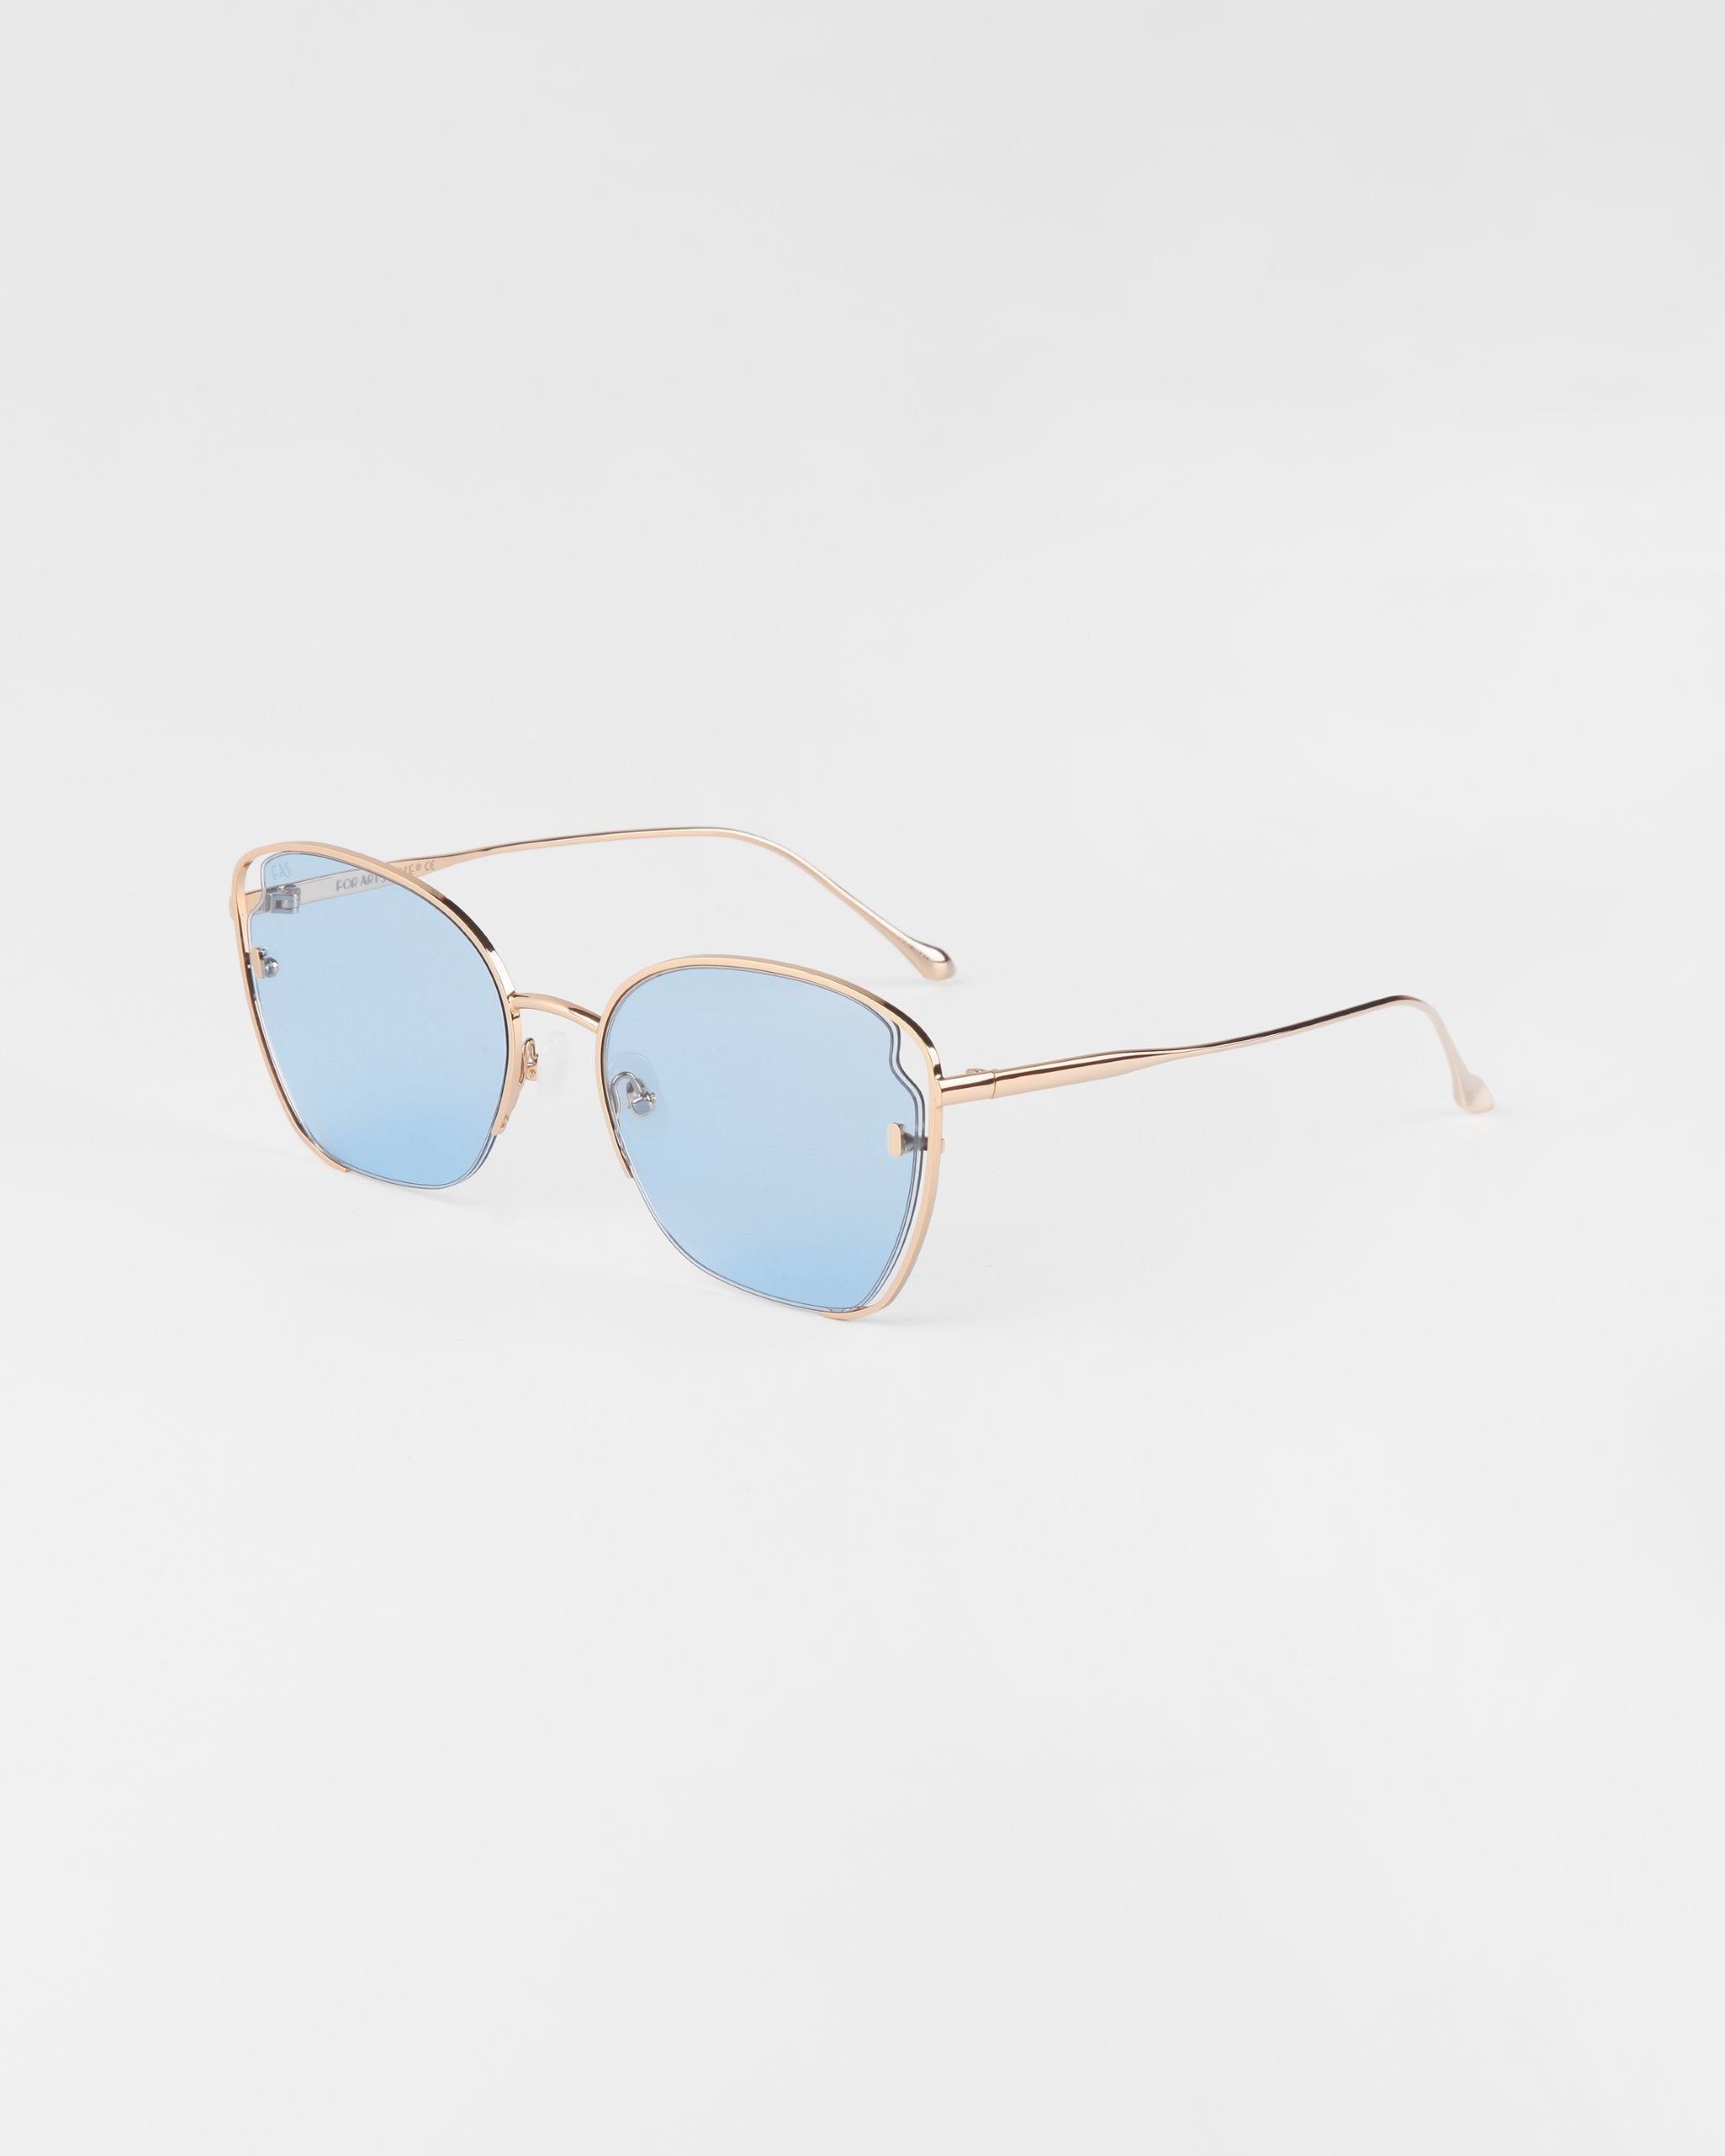 A pair of Eden sunglasses by For Art&#39;s Sake® with thin, 18-karat gold-plated frames and light blue-tinted square lenses is displayed against a plain white background. The glasses have subtly curved arms and a minimalist design, exuding a modern and sophisticated appearance, while being UVA &amp; UVB-protected.